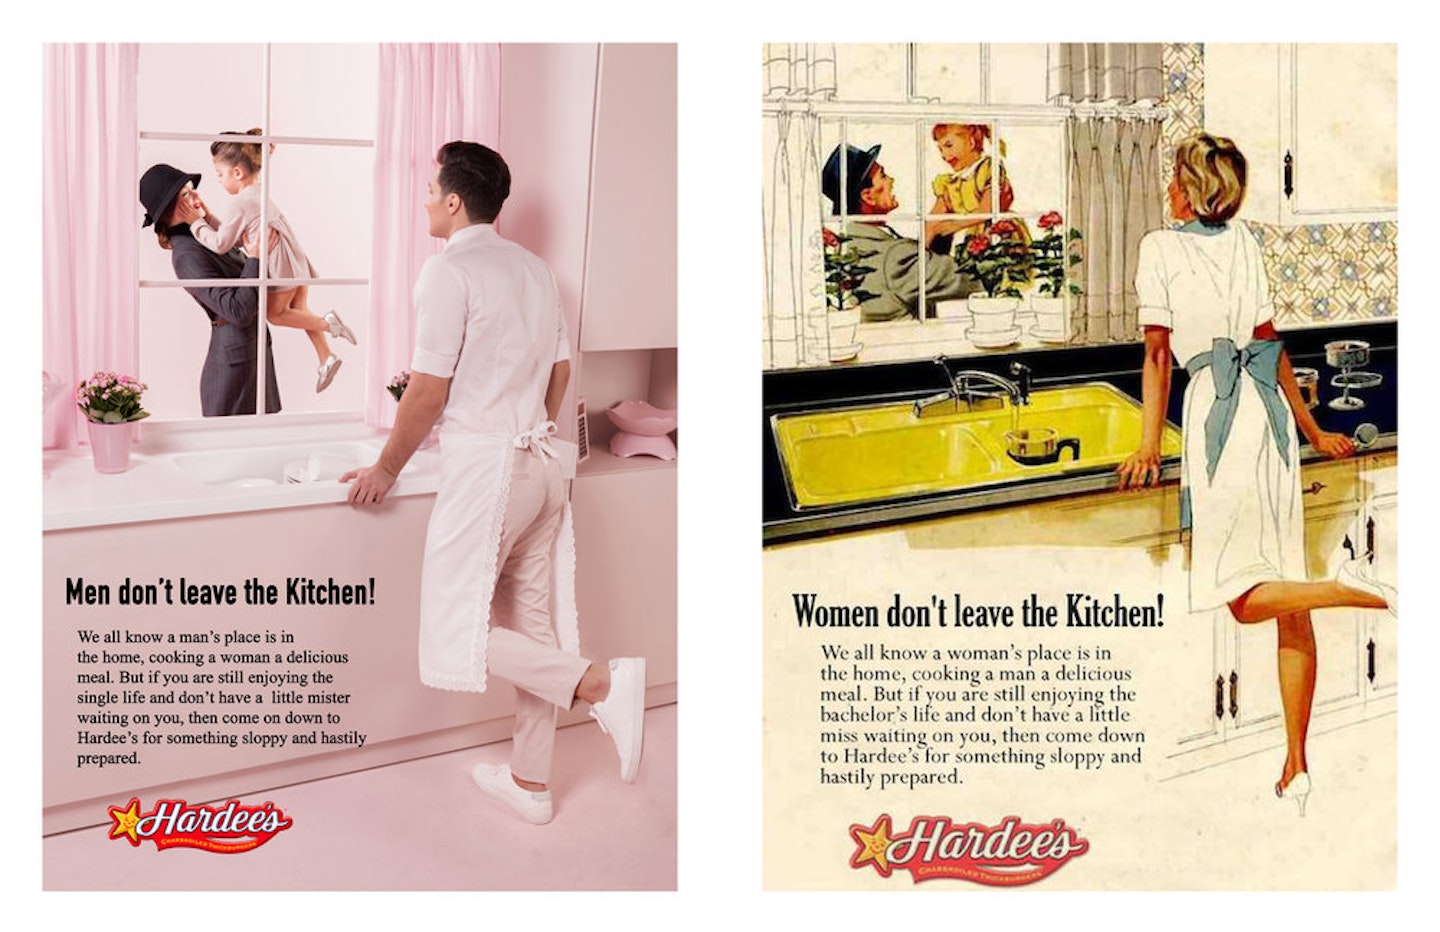 Here’s What Sexist Ads From The 60s Would Look Like If The Gender Roles Were Reversed